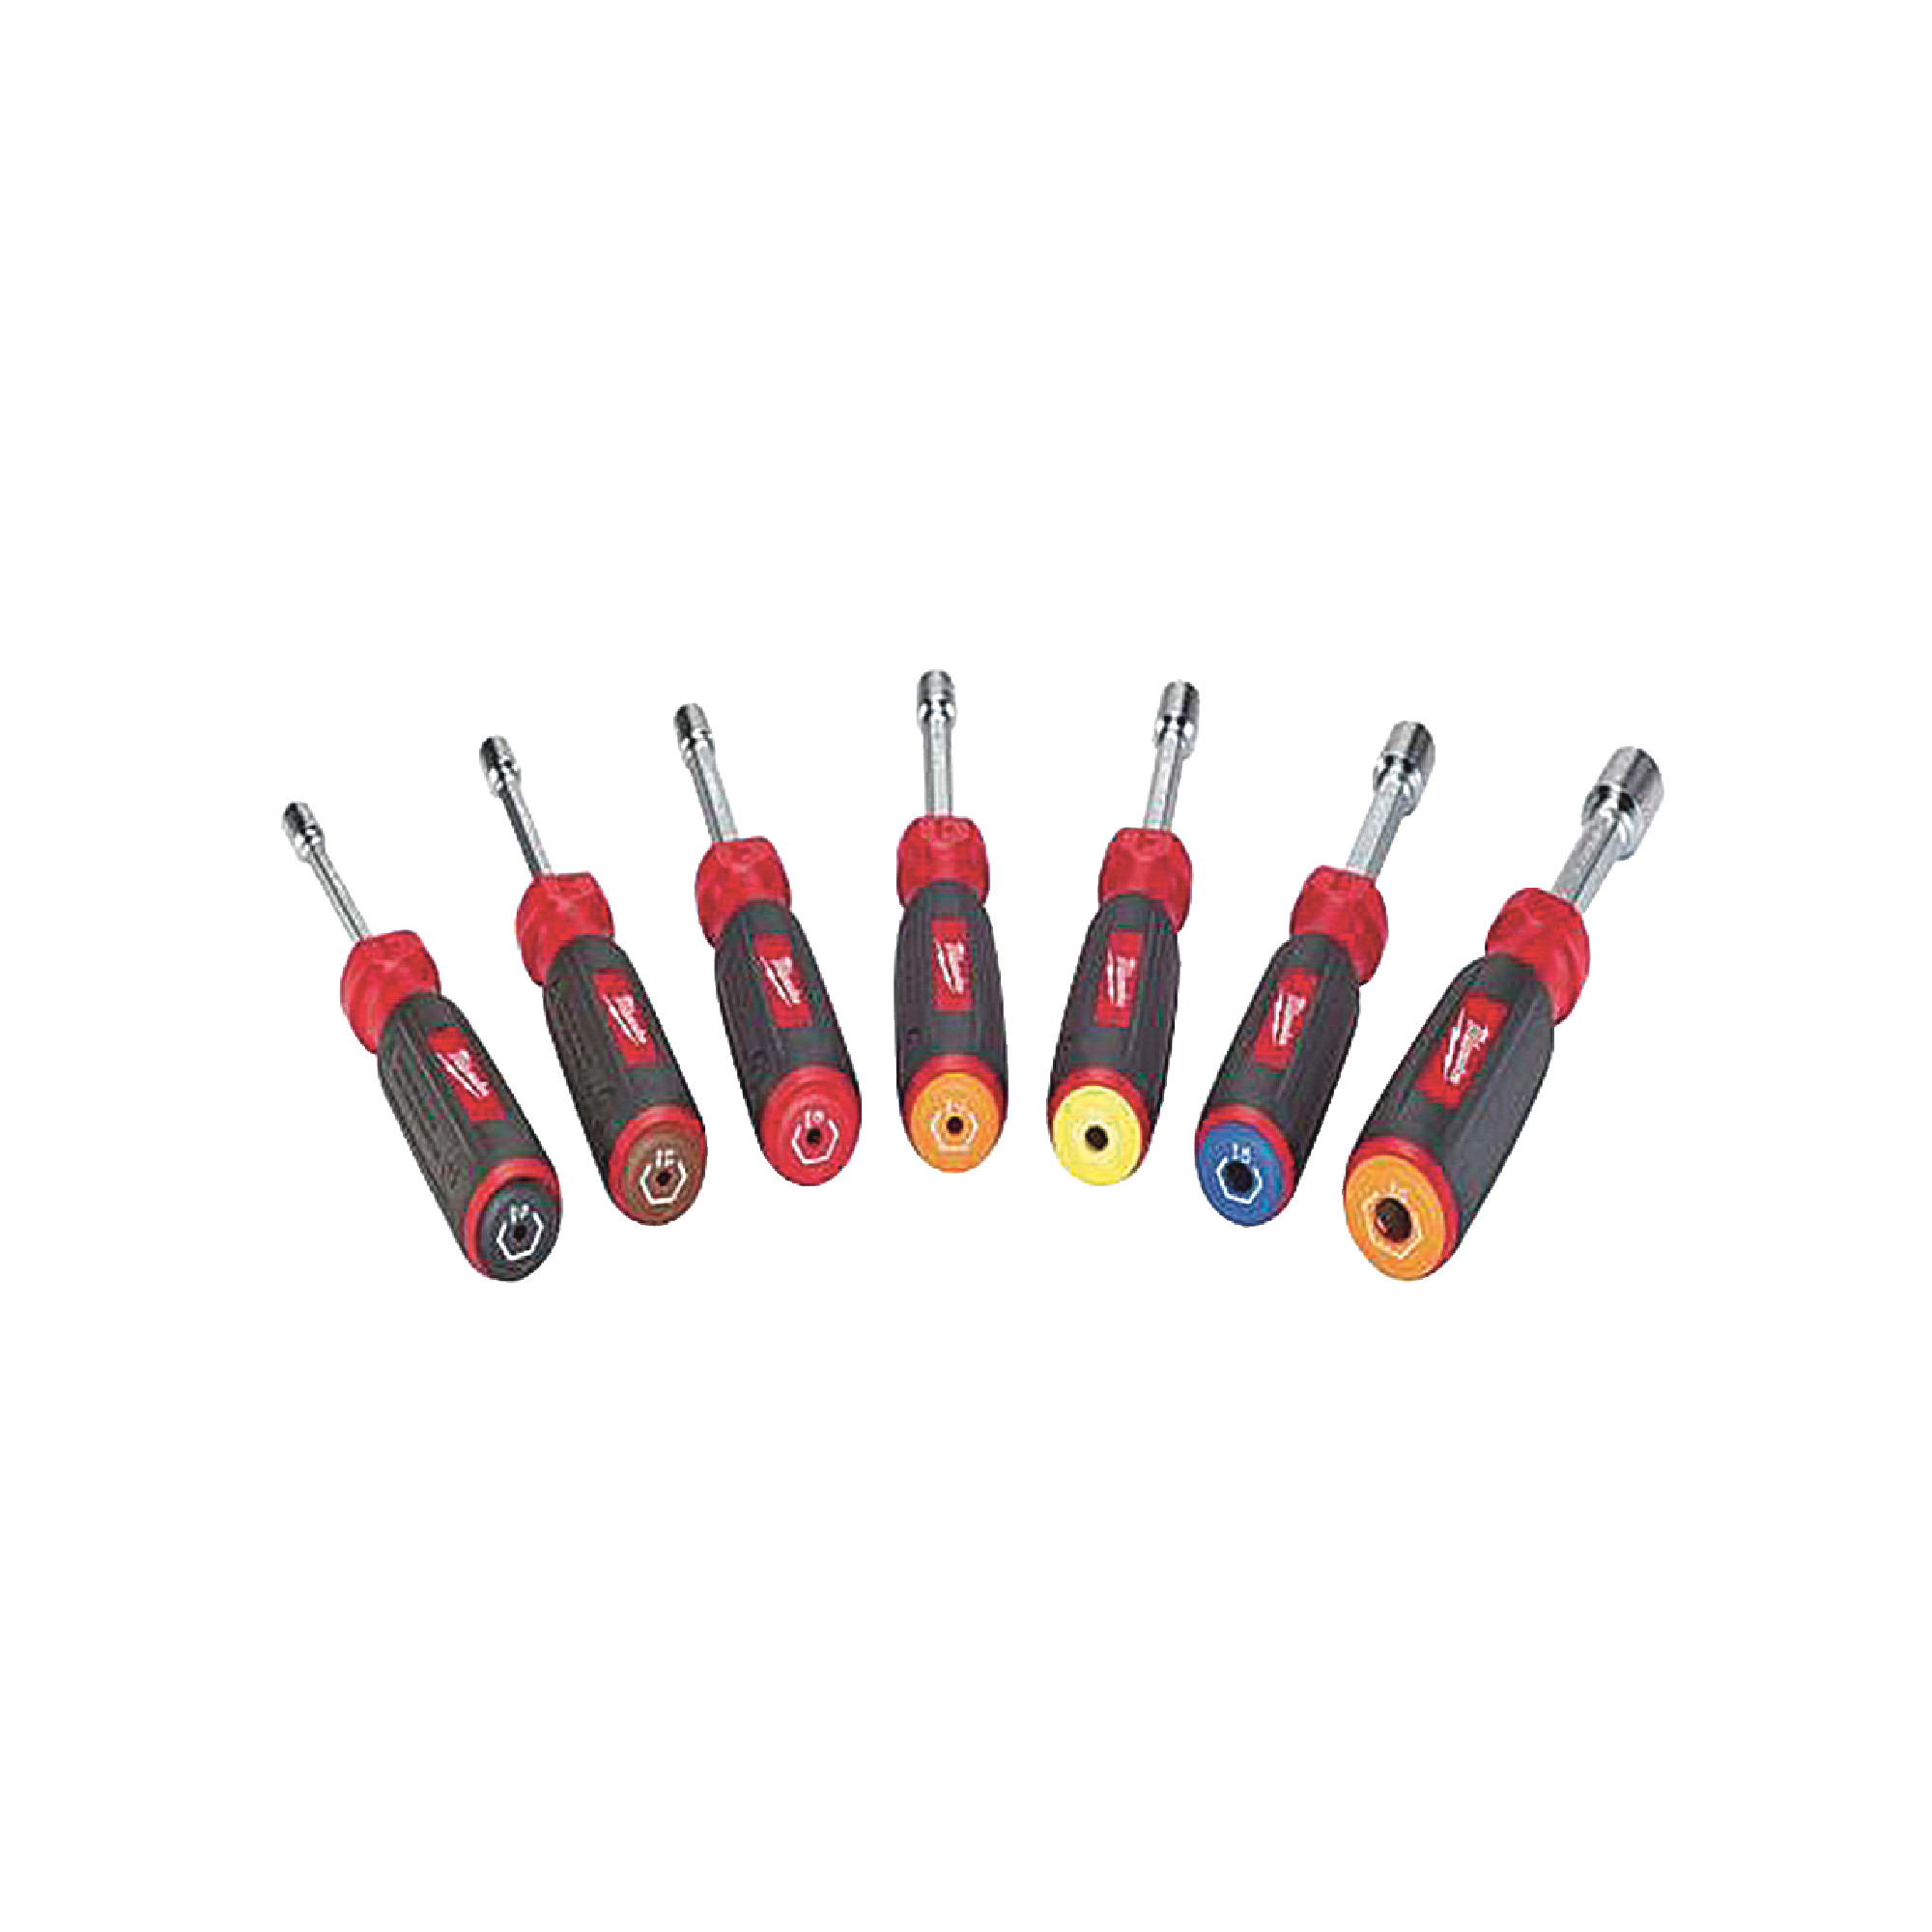 7 Piece 5mm To 13mm  HollowCore Magnetic Nut Driver Set - Model: 48-22-2517